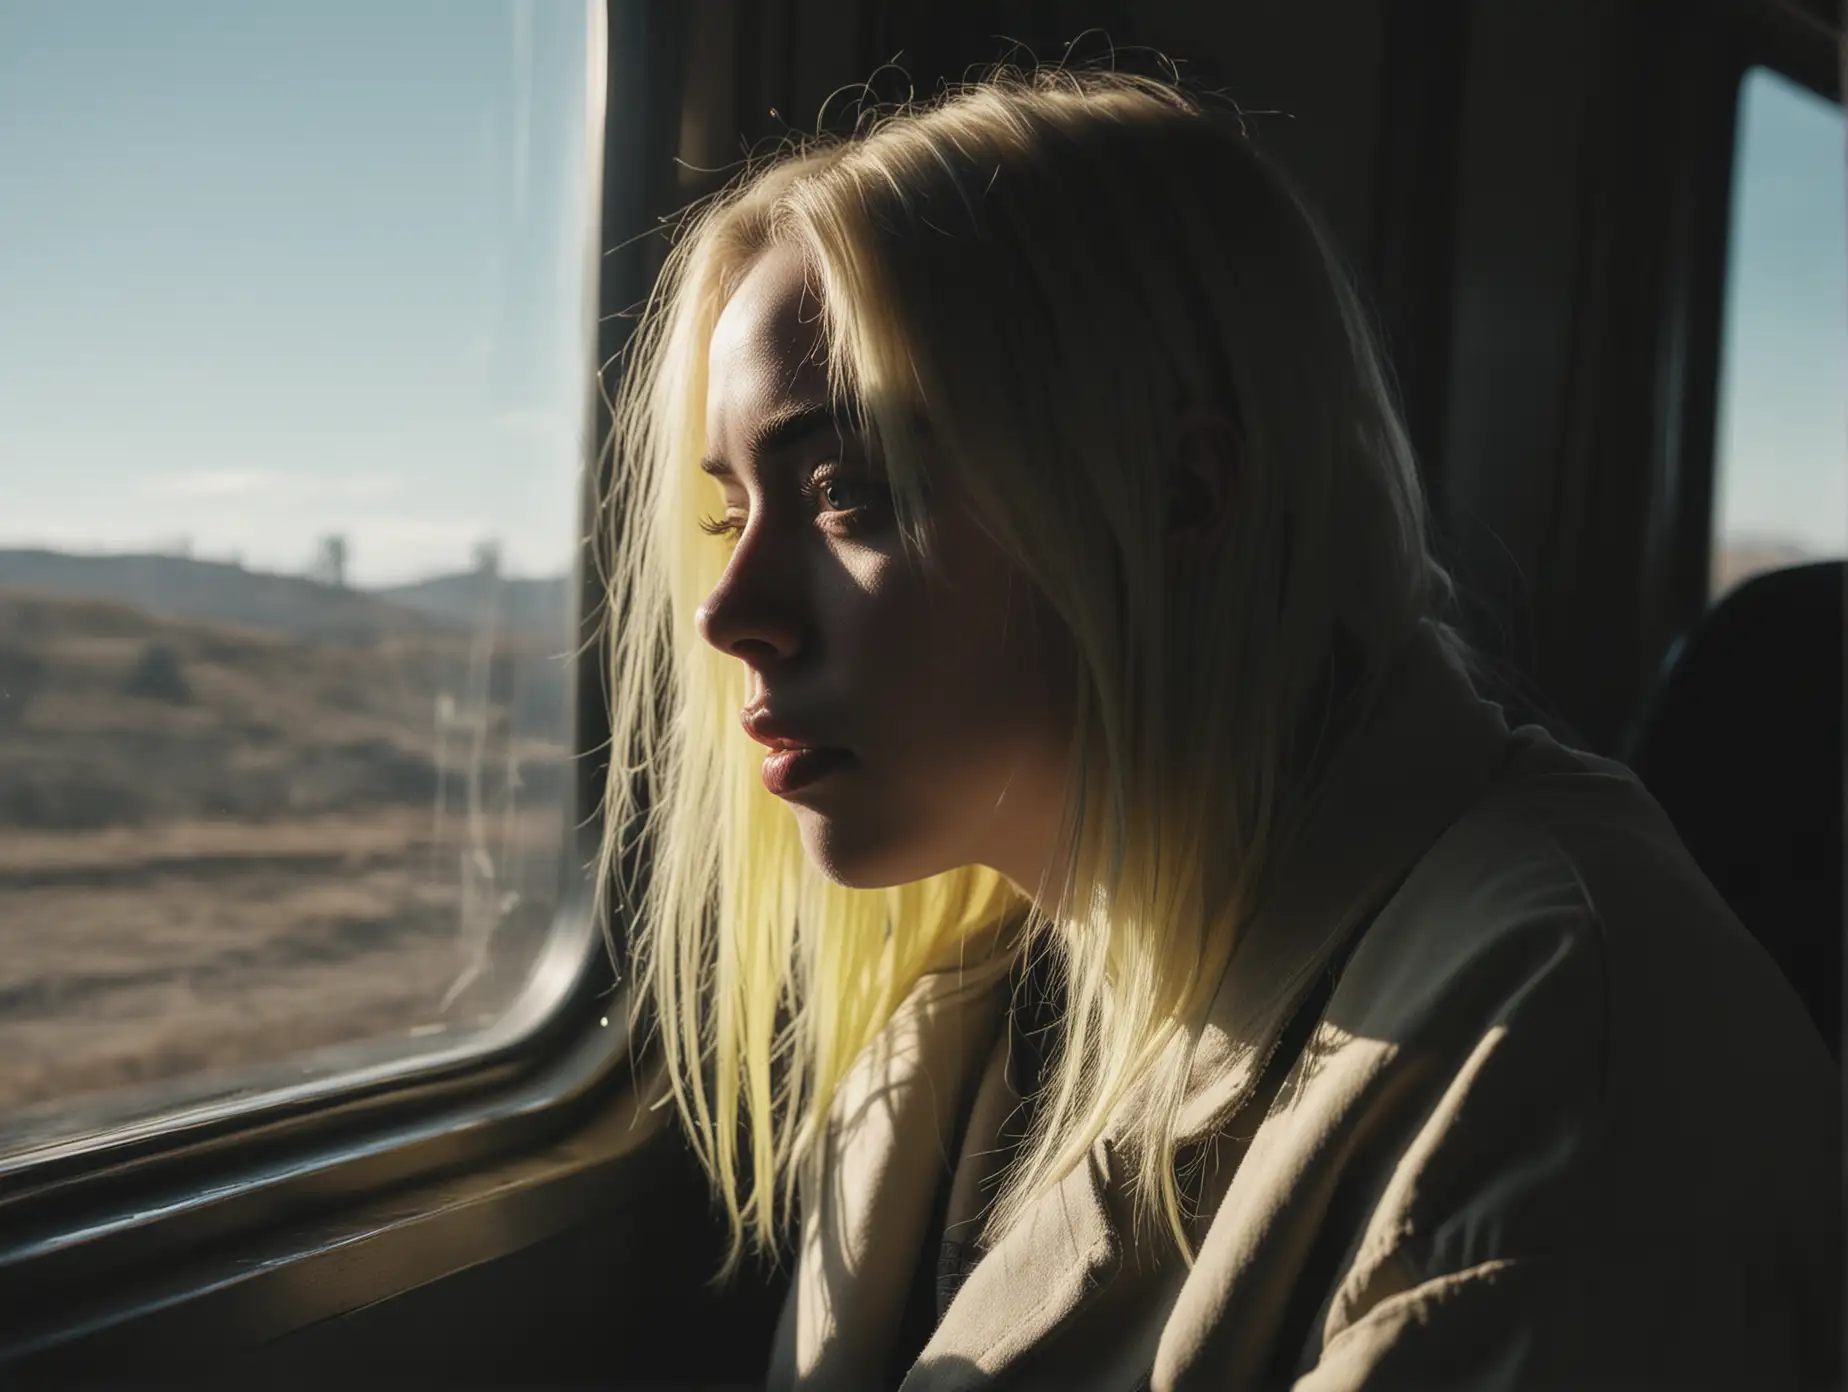 Billie Eilish lit in profile from window, in shadows hiding in train seat, cinematic